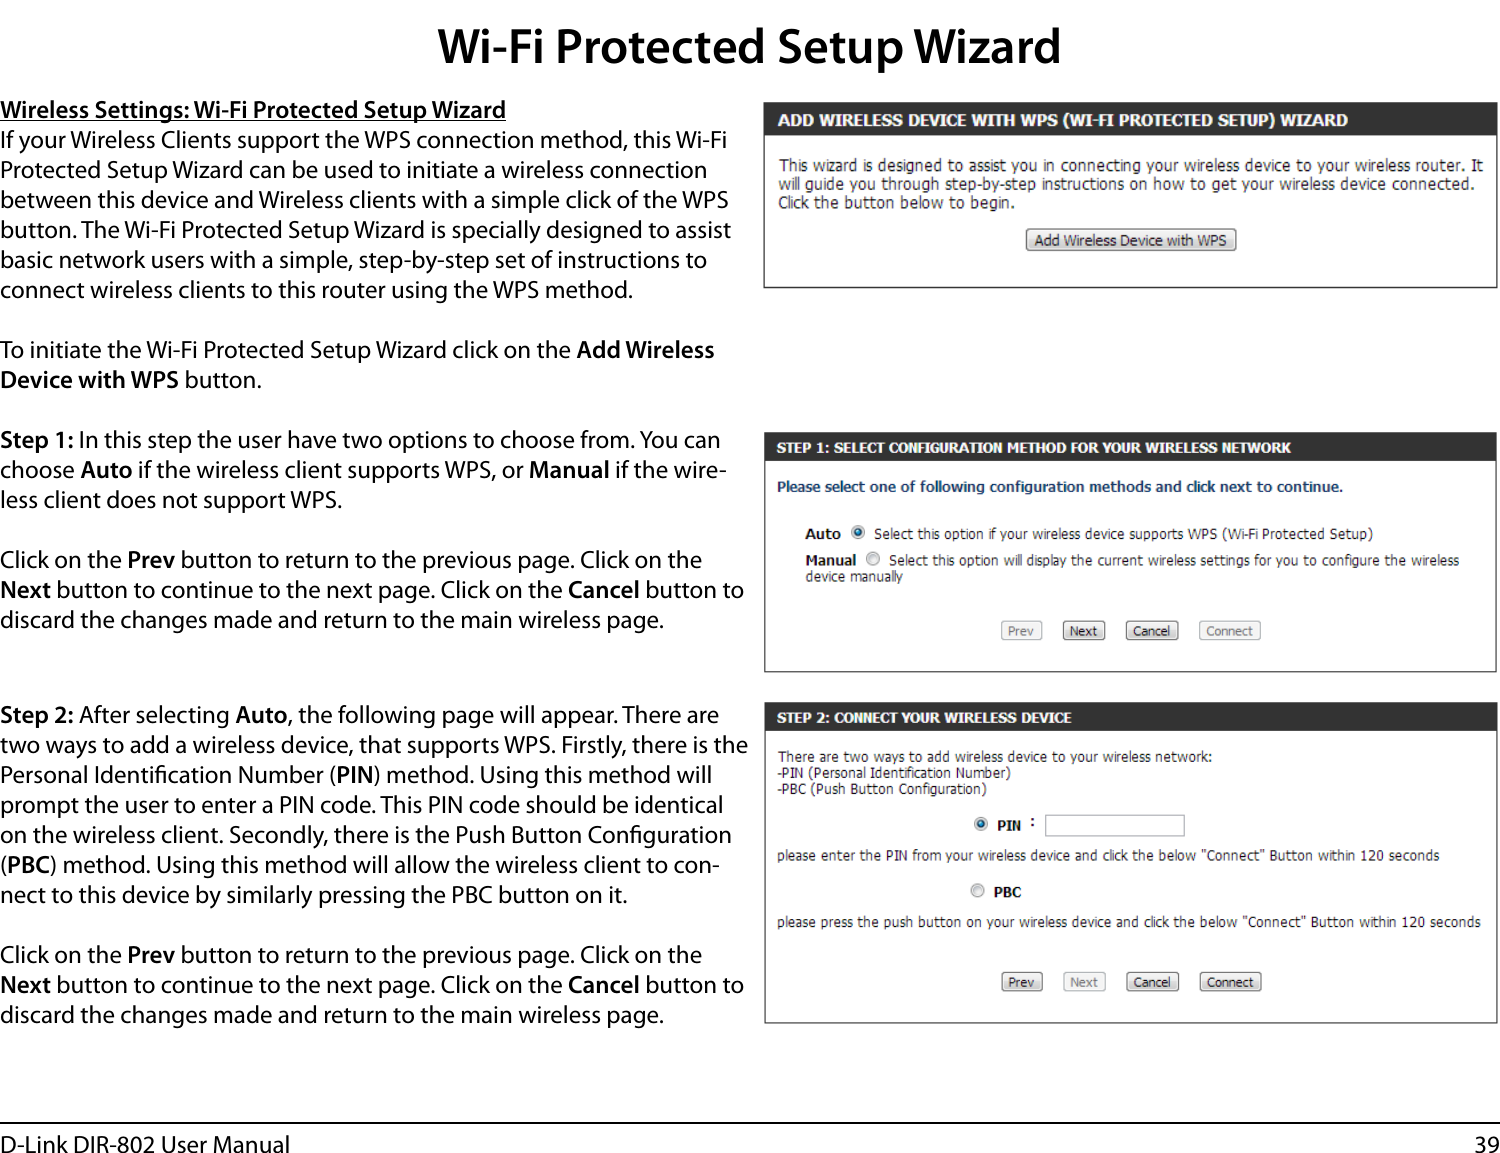 39D-Link DIR-802 User ManualWireless Settings: Wi-Fi Protected Setup WizardIf your Wireless Clients support the WPS connection method, this Wi-Fi Protected Setup Wizard can be used to initiate a wireless connection between this device and Wireless clients with a simple click of the WPS button. The Wi-Fi Protected Setup Wizard is specially designed to assist basic network users with a simple, step-by-step set of instructions to connect wireless clients to this router using the WPS method.To initiate the Wi-Fi Protected Setup Wizard click on the Add Wireless Device with WPS button.Step 1: In this step the user have two options to choose from. You can choose Auto if the wireless client supports WPS, or Manual if the wire-less client does not support WPS.Click on the Prev button to return to the previous page. Click on the Next button to continue to the next page. Click on the Cancel button to discard the changes made and return to the main wireless page.Step 2: After selecting Auto, the following page will appear. There are two ways to add a wireless device, that supports WPS. Firstly, there is the Personal Identication Number (PIN) method. Using this method will prompt the user to enter a PIN code. This PIN code should be identical on the wireless client. Secondly, there is the Push Button Conguration (PBC) method. Using this method will allow the wireless client to con-nect to this device by similarly pressing the PBC button on it.Click on the Prev button to return to the previous page. Click on the Next button to continue to the next page. Click on the Cancel button to discard the changes made and return to the main wireless page.Wi-Fi Protected Setup Wizard